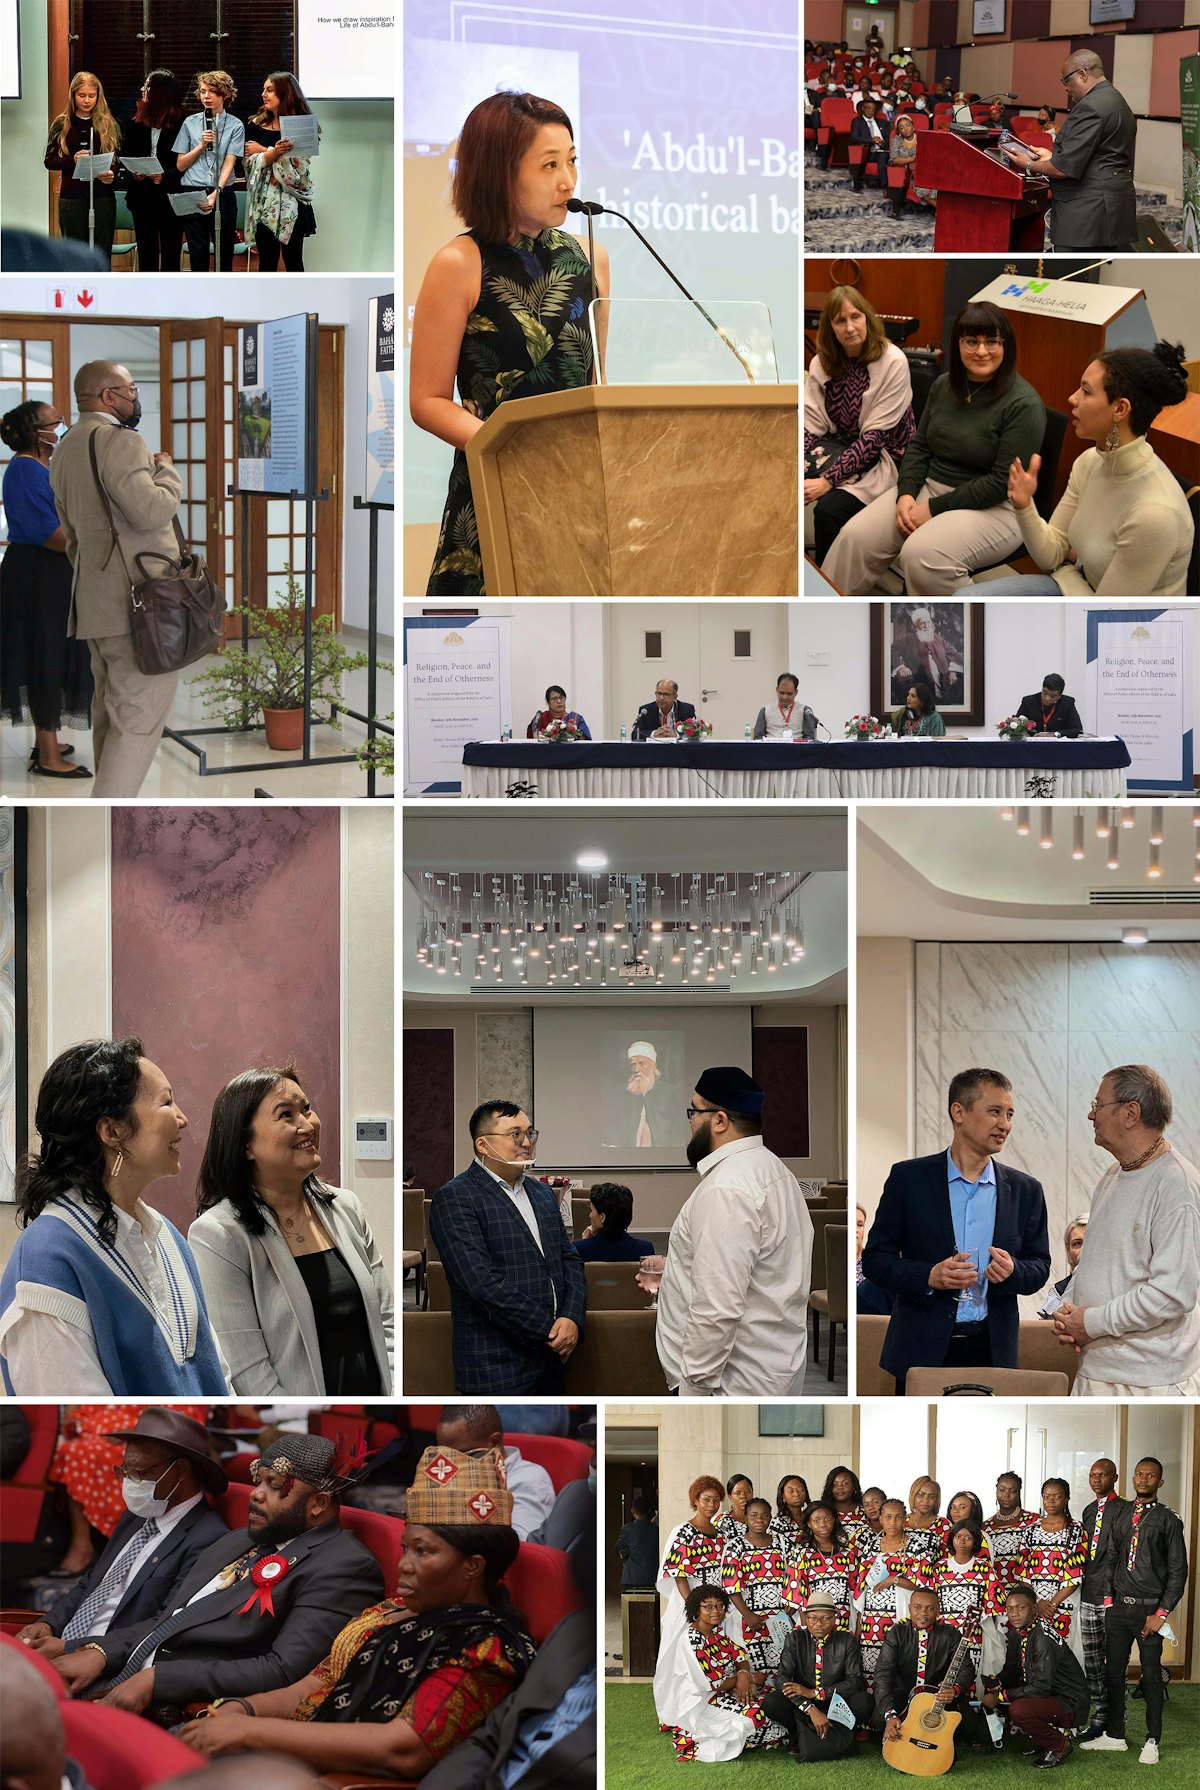 National Bahá’í communities around the world brought together diverse social actors to explore some of the universal principles embodied by ‘Abdu’l-Bahá.